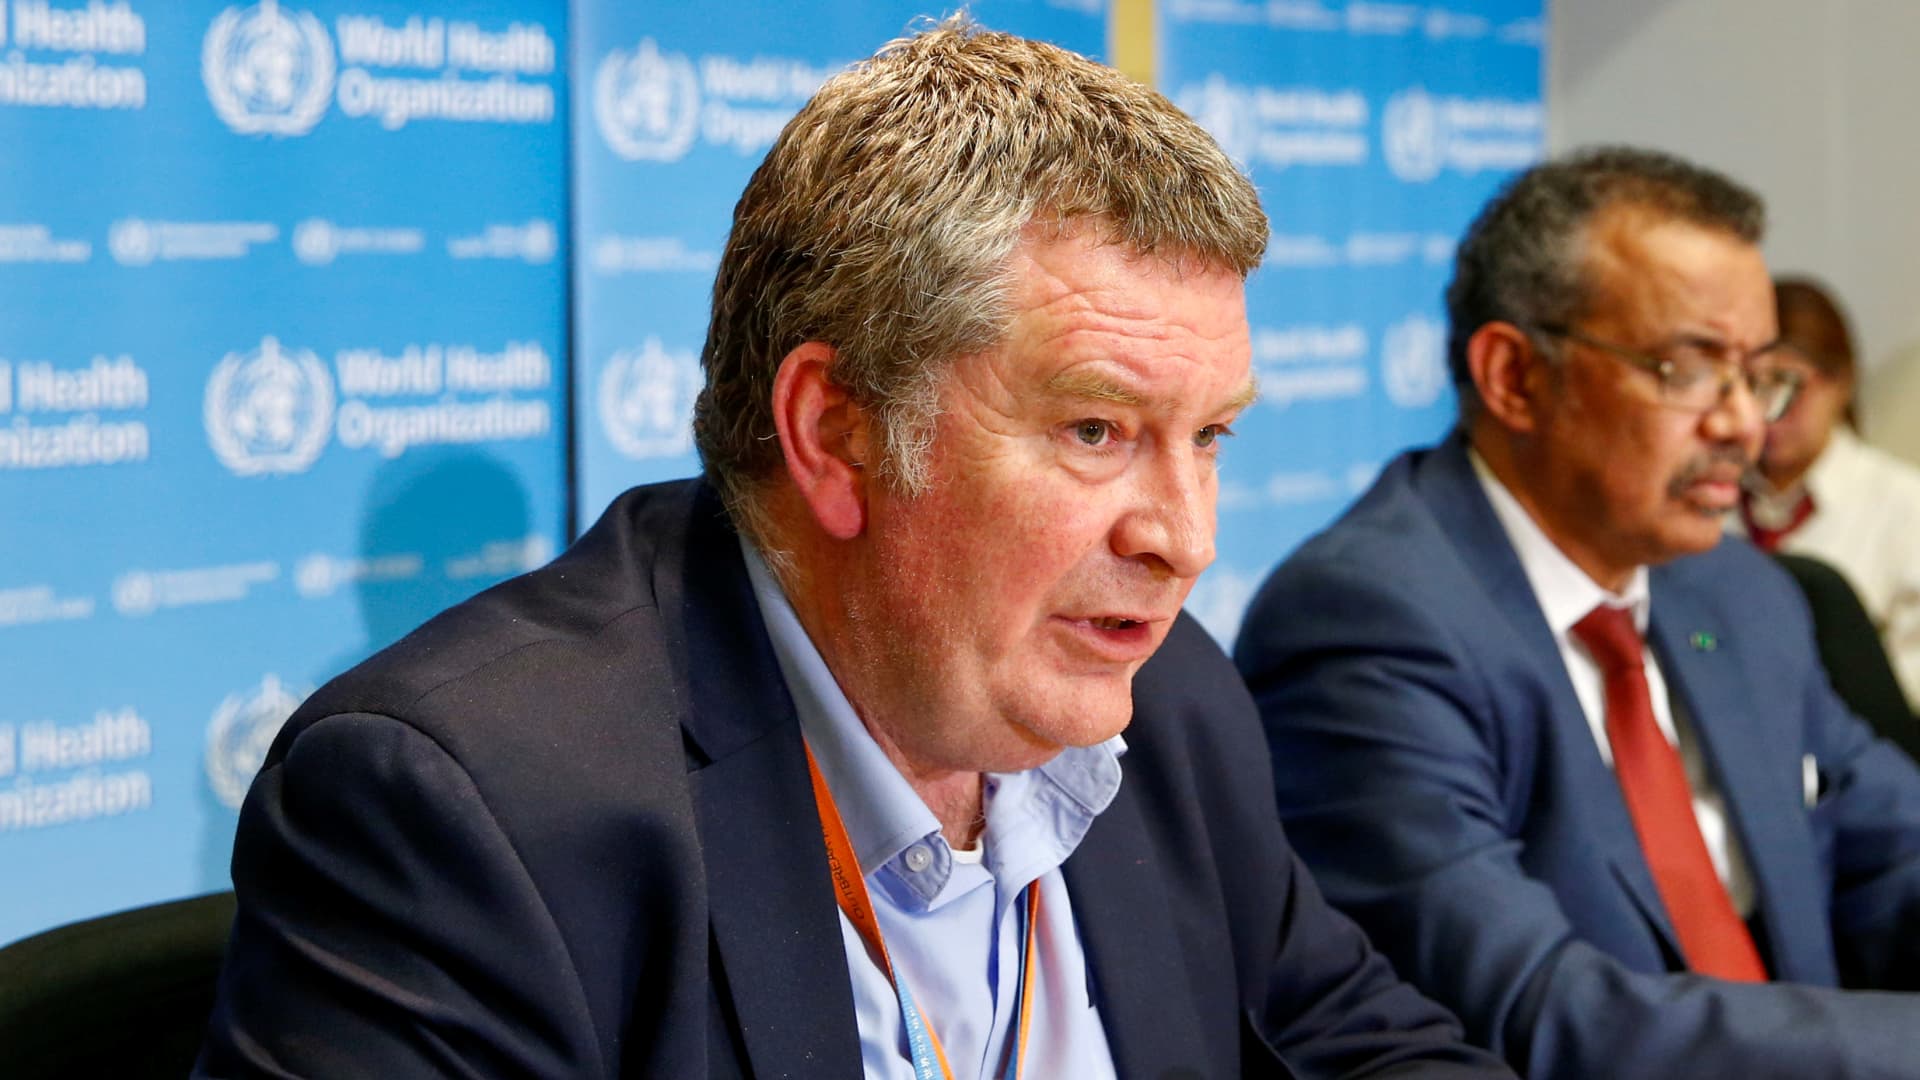 Executive Director of the WHO Emergencies Program Mike Ryan speaks at a news conference in Geneva, Switzerland on Feb. 6, 2020.